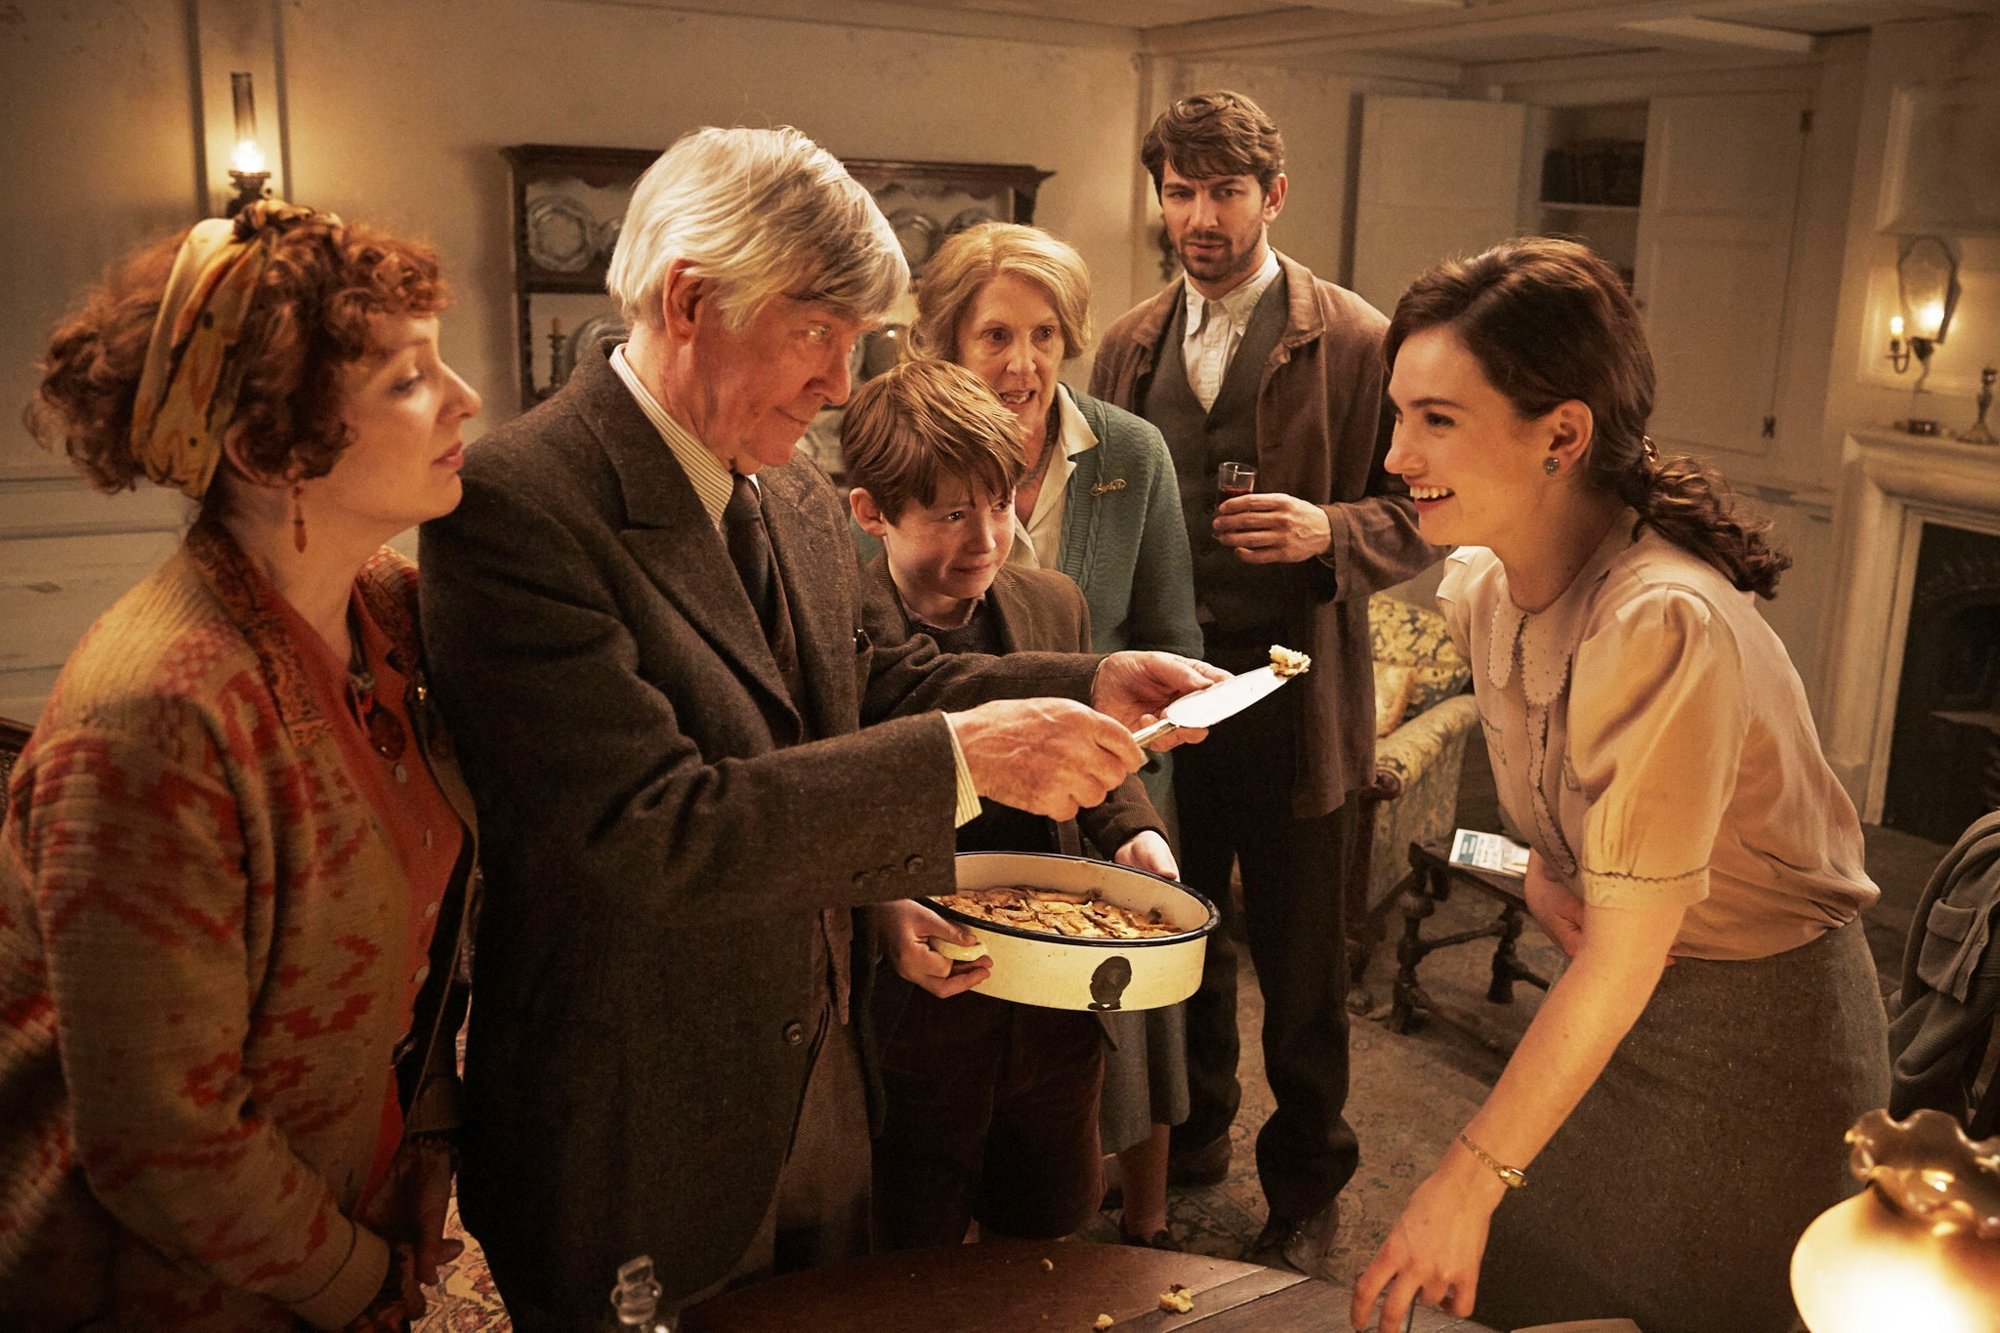 Katherine Parkinson, Tom Courtenay, Kit Connor, Penelope Wilton, Michiel Huisman and Lily James in Netflix's The Guernsey Literary and Potato Peel Pie Society (2018)